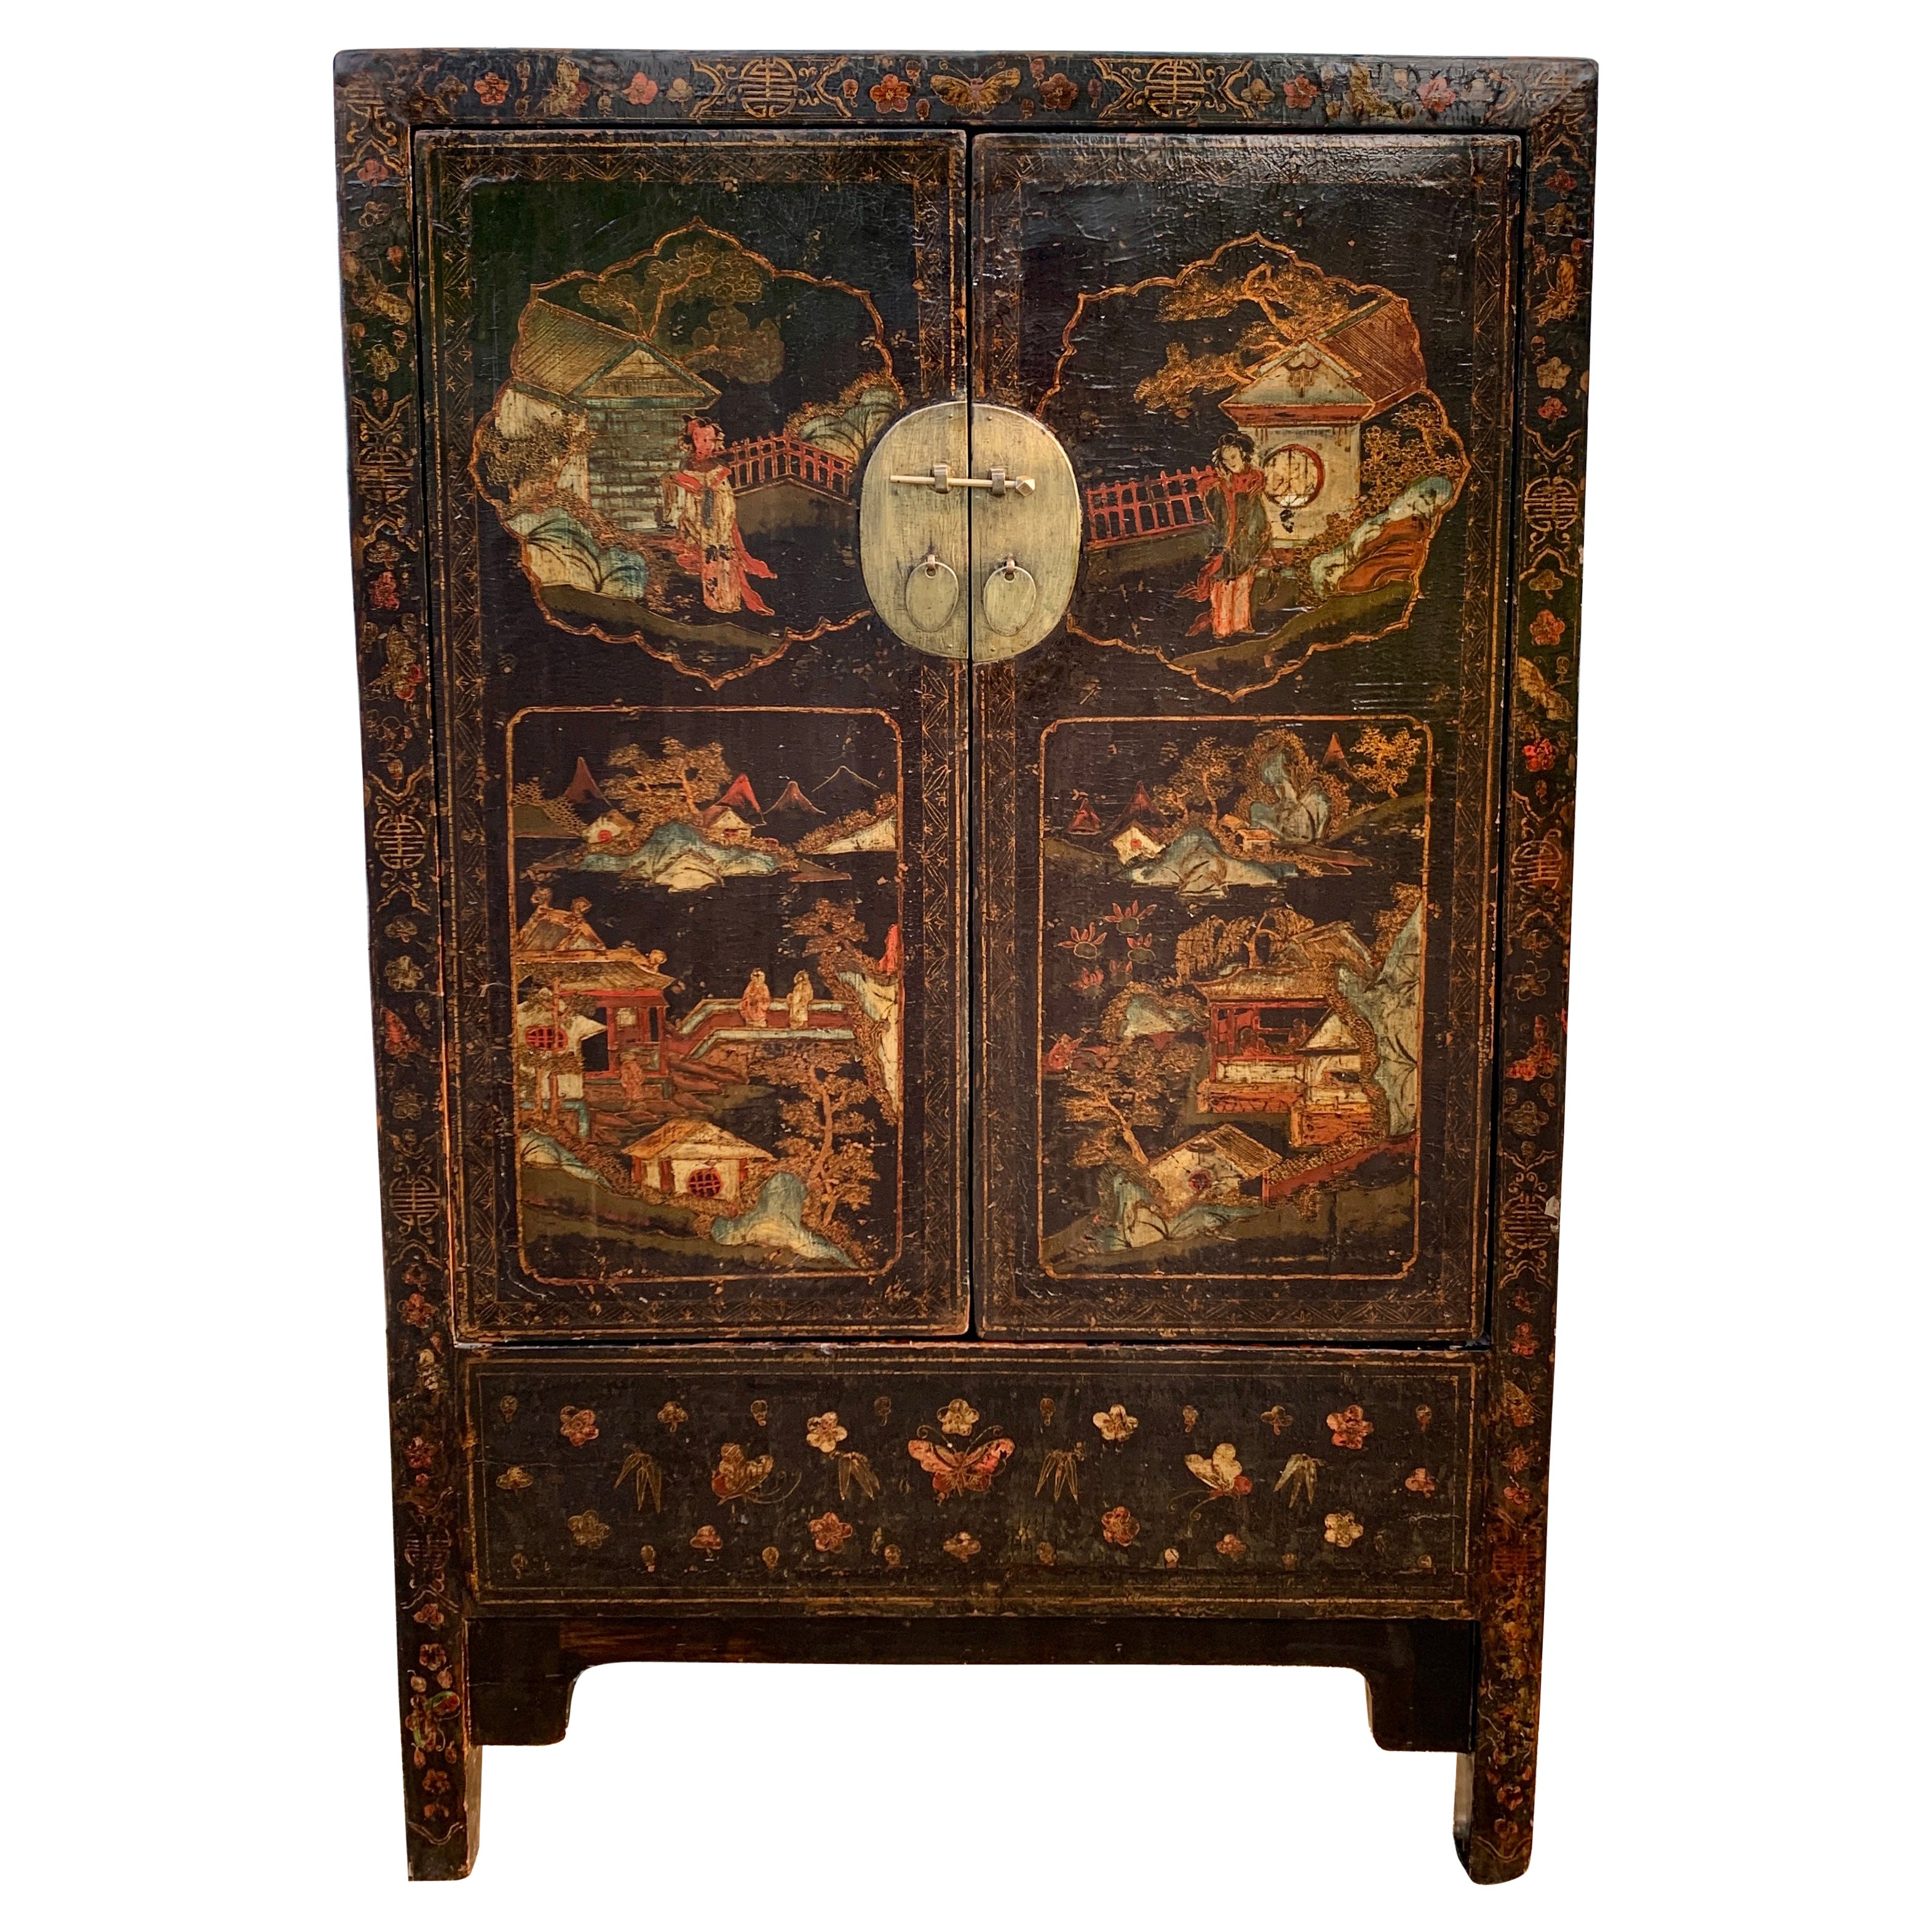 Antique Chinese Qing Dynasty Shanxi Painted Lacquer Cabinet, 19th Century